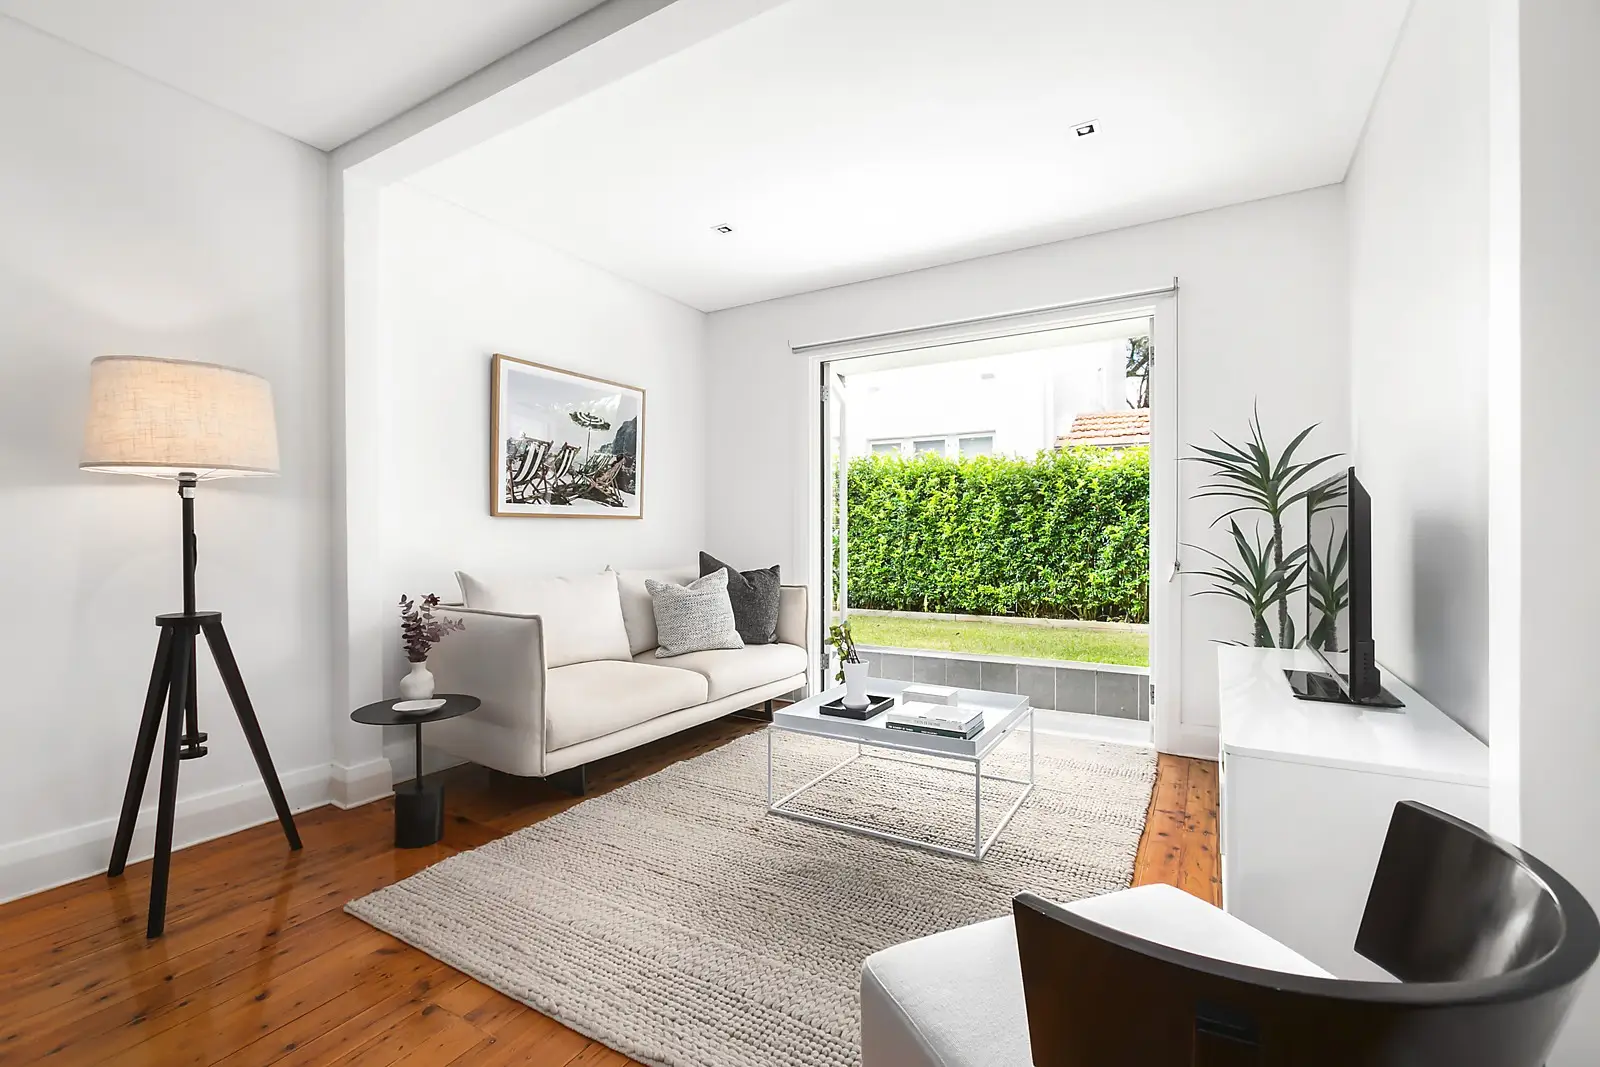 Photo #2: 1/9 Glenwood Avenue, Coogee - Sold by Sydney Sotheby's International Realty